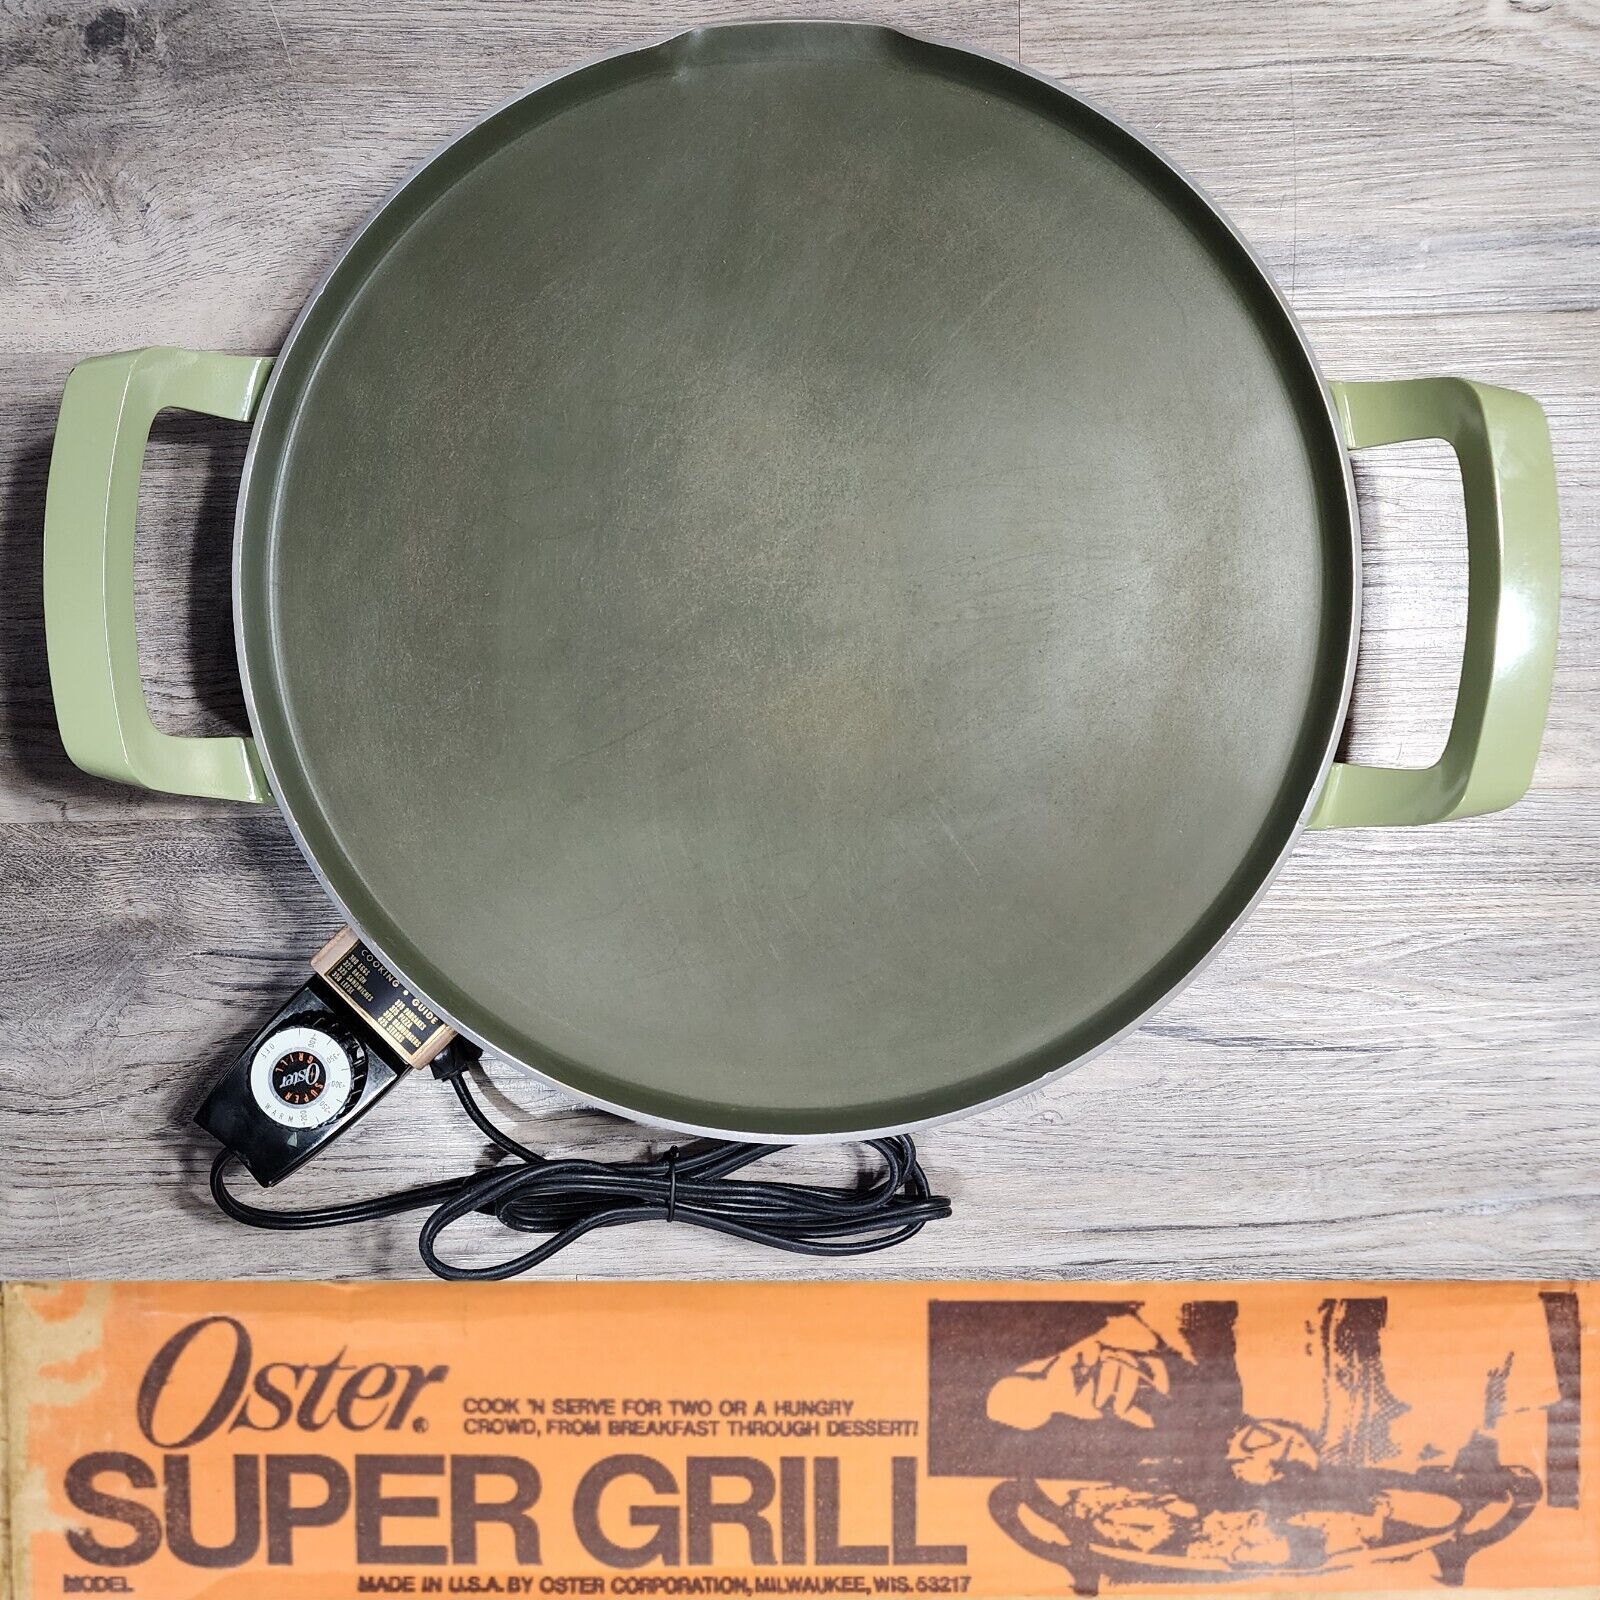 Vintage Oster Super Grill Cooking Surface Griddle MCM HTF Avocado Green